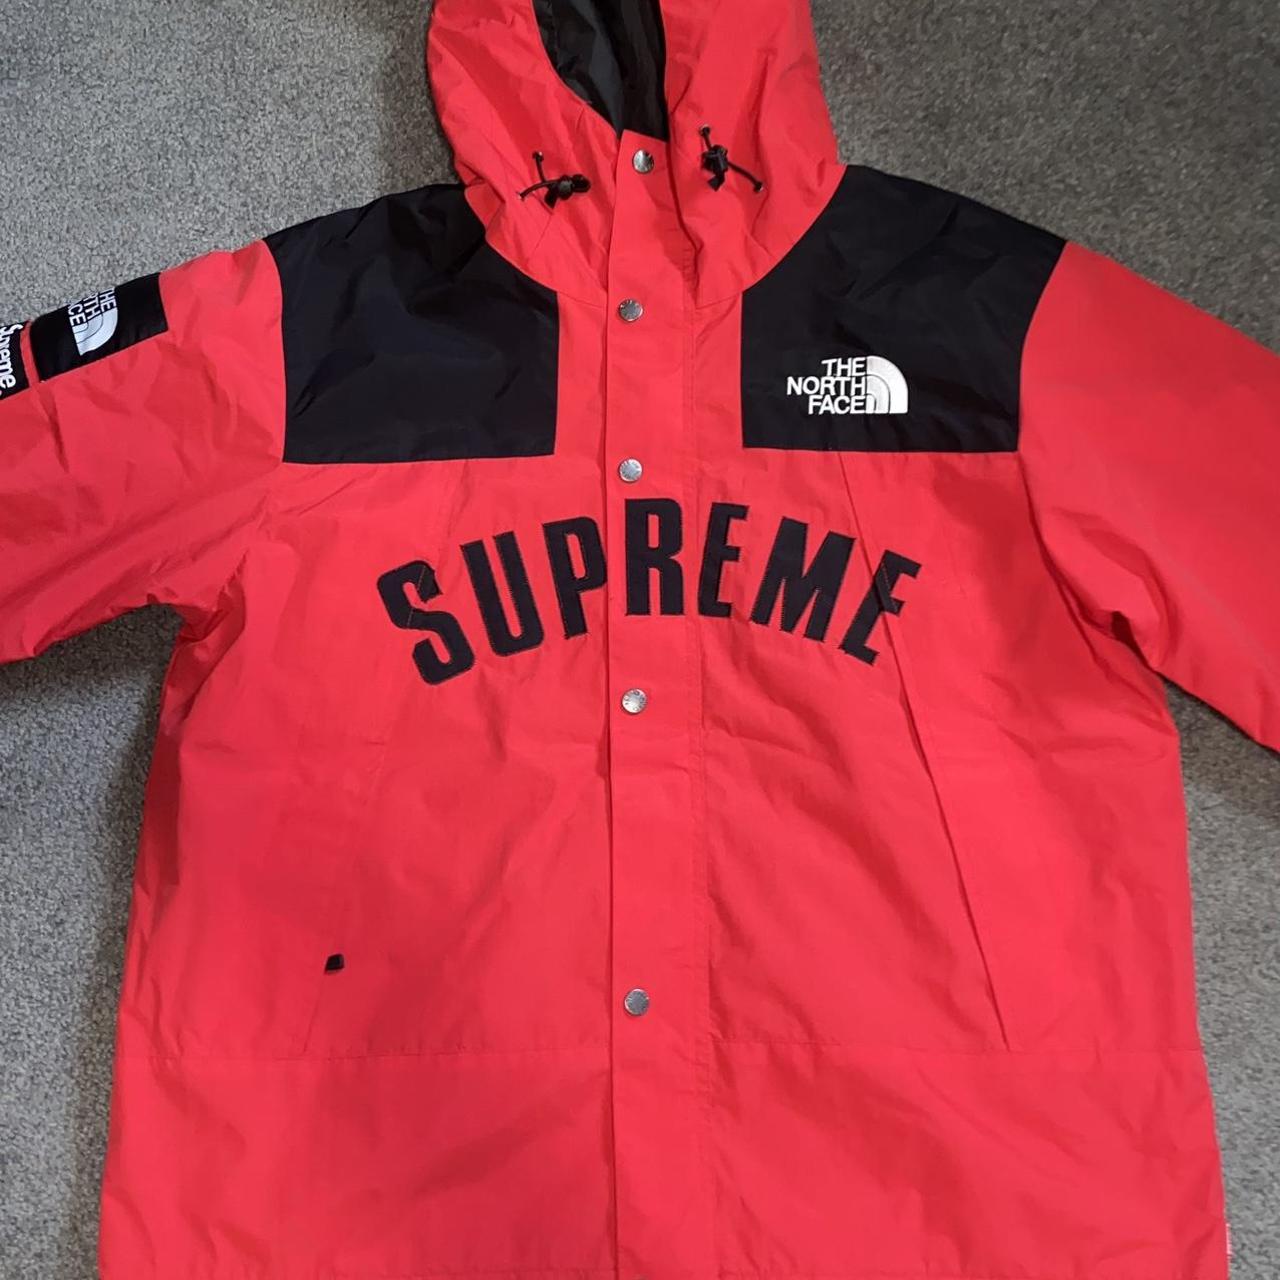 Supreme X NorthFace Collab Jacket Red with Arc... - Depop